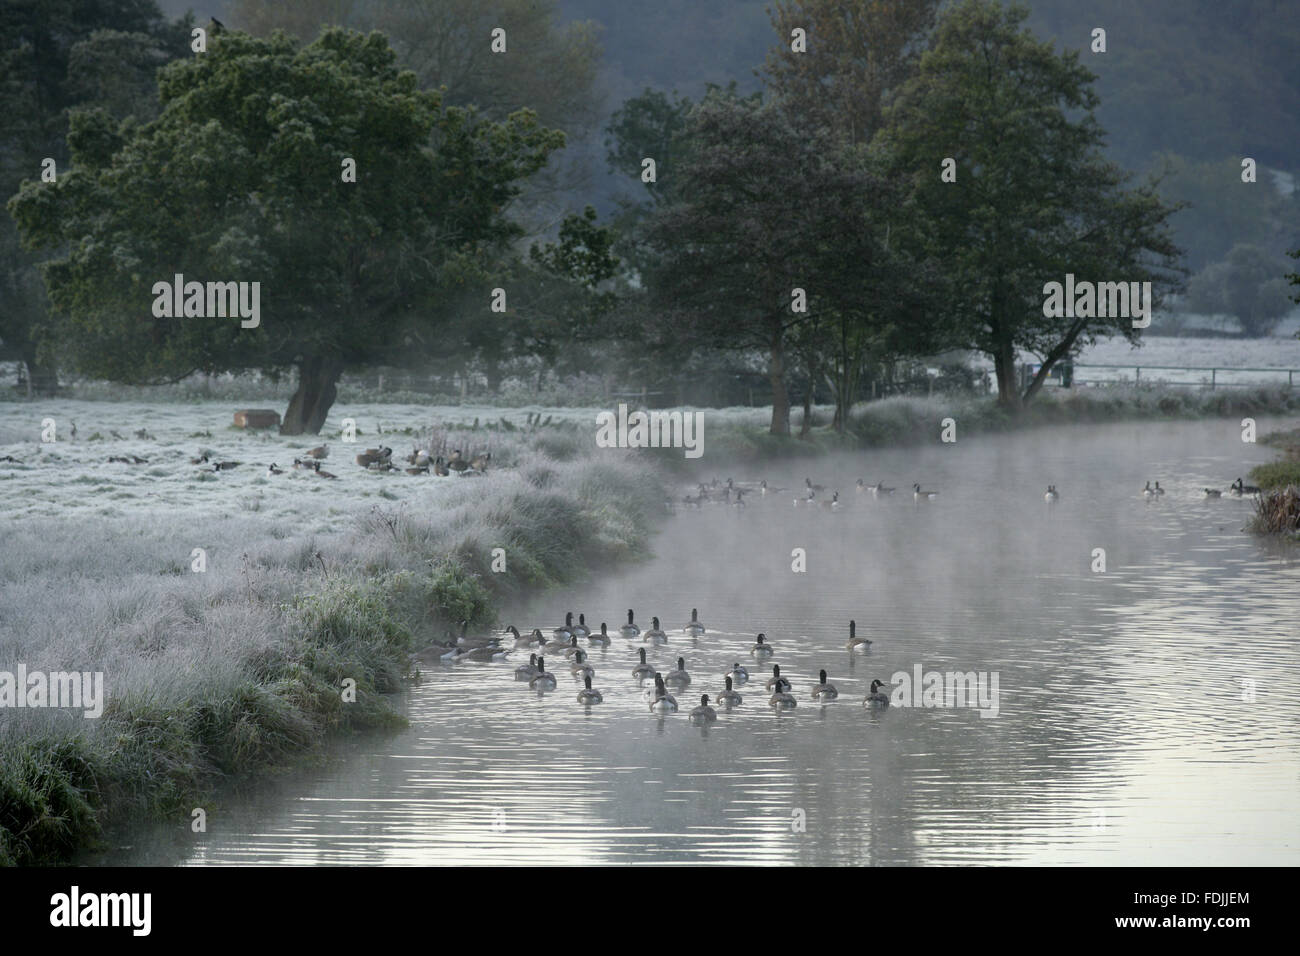 A frosty winter scene at the River Wey Navigations, Surrey. Stock Photo